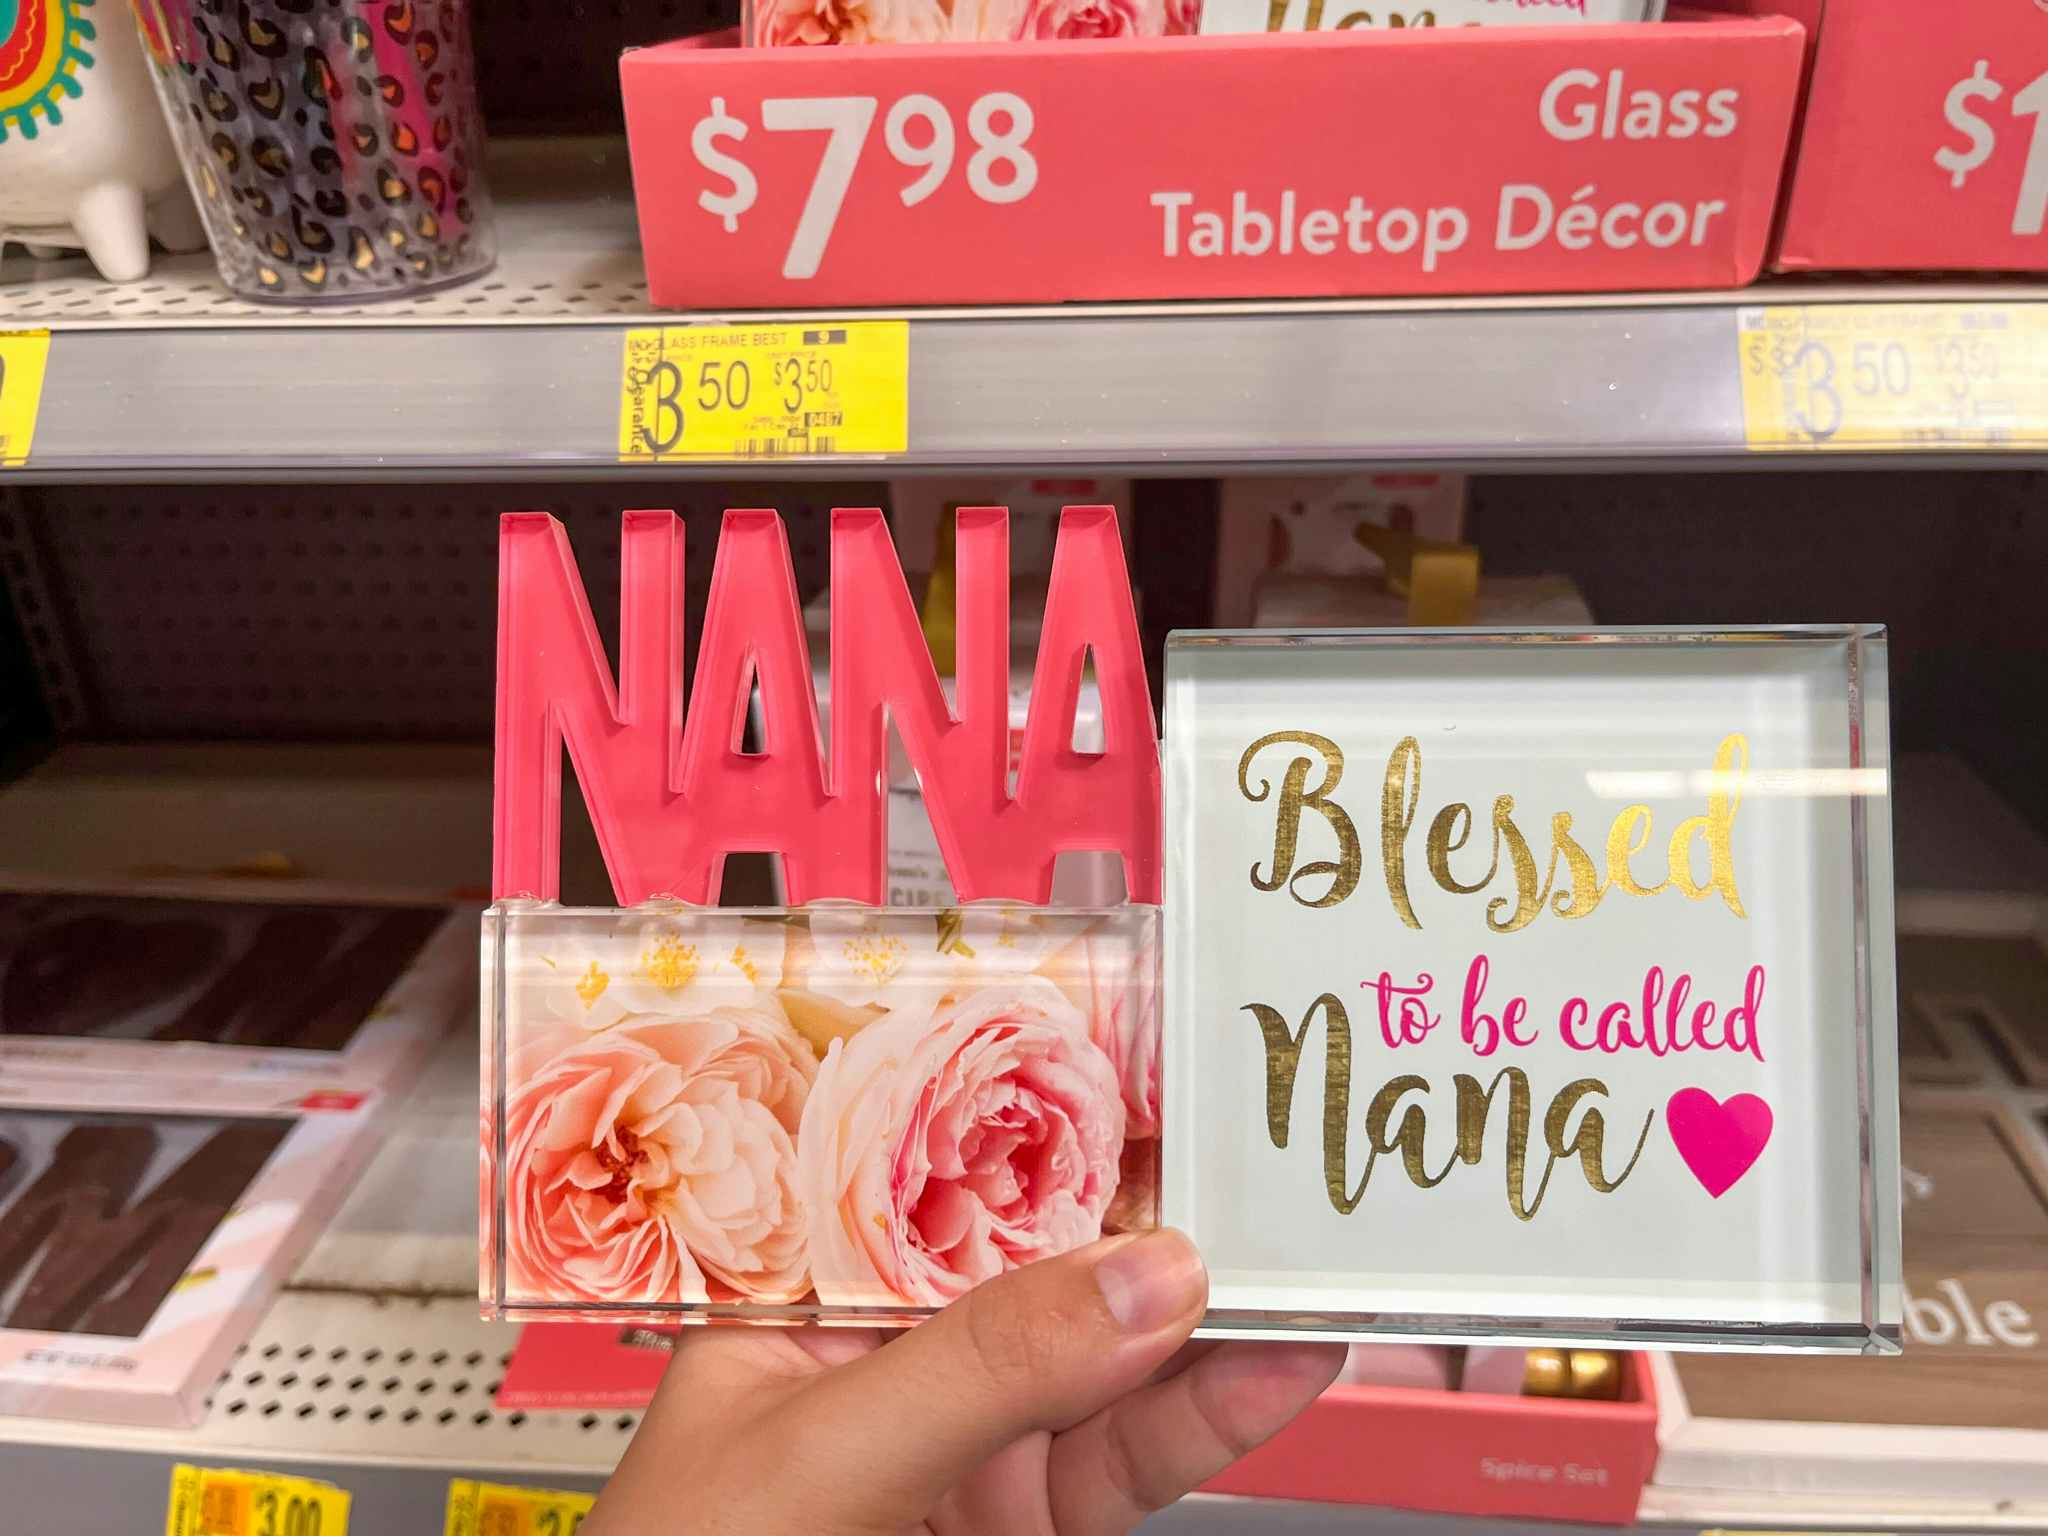 walmart mothers day clearance glass blessed nana sign hand holding